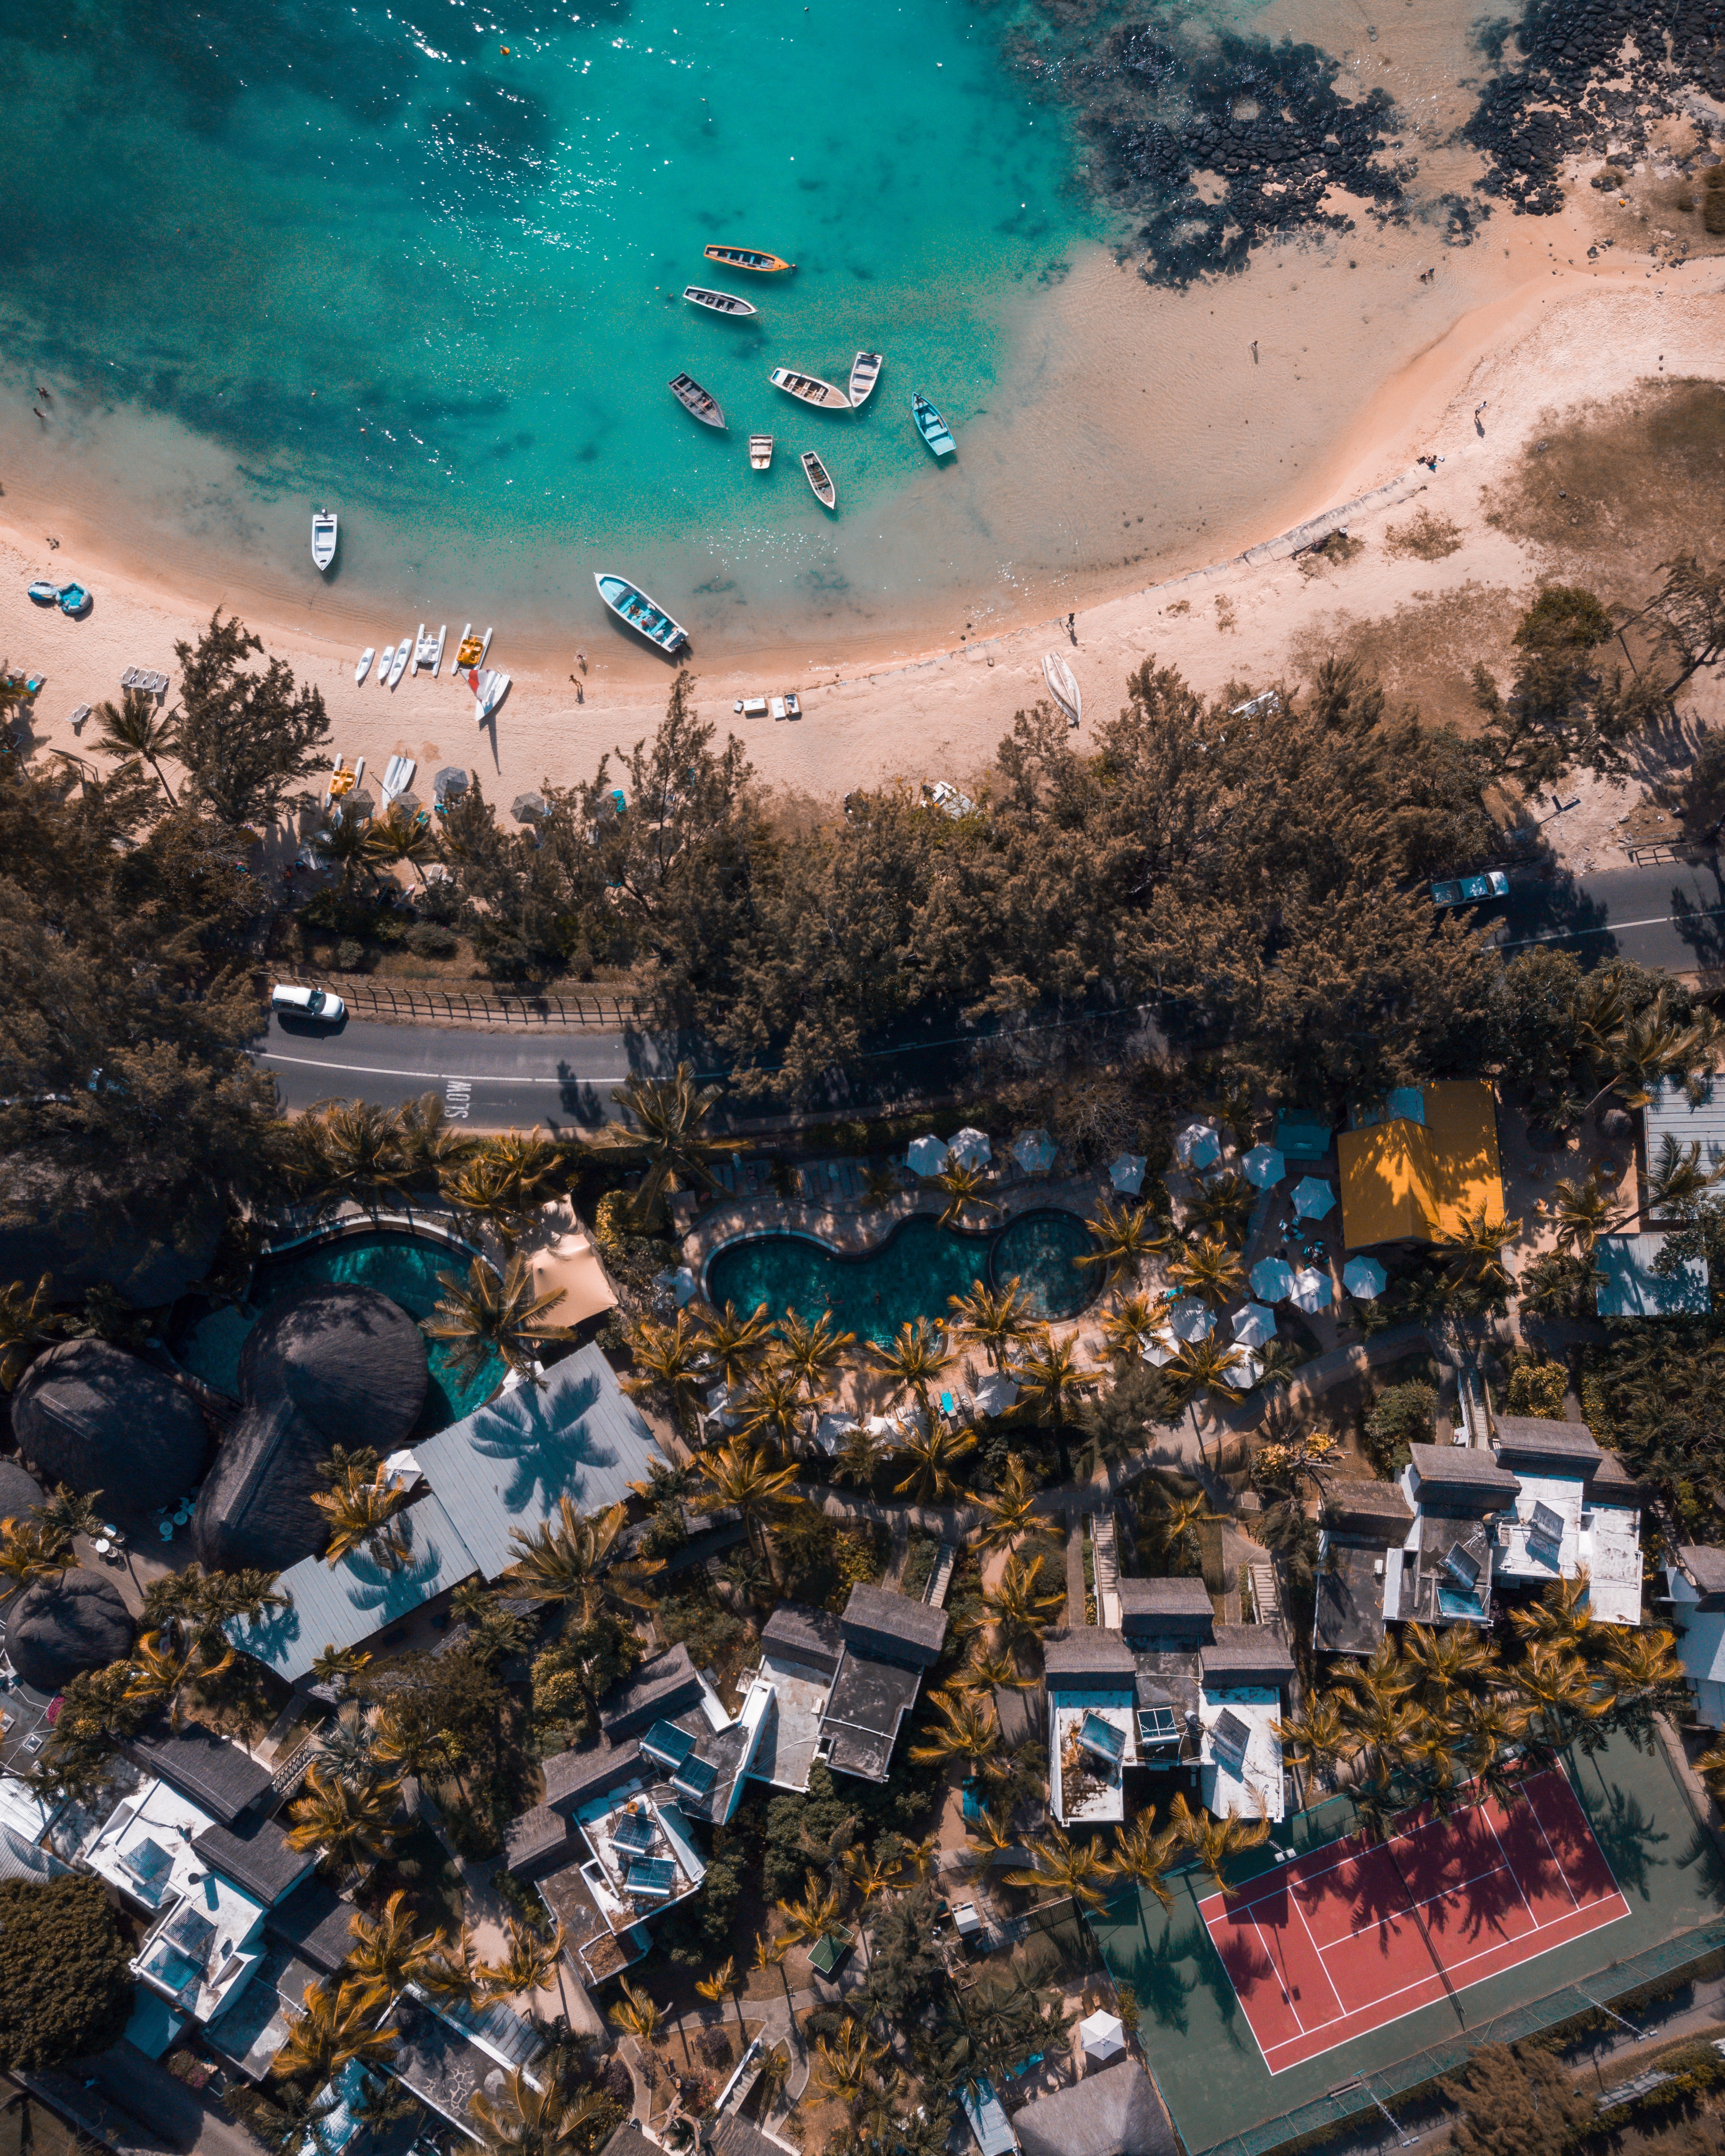 desktop Images miscellaneous, trees, beach, building, view from above, coast, miscellanea, road